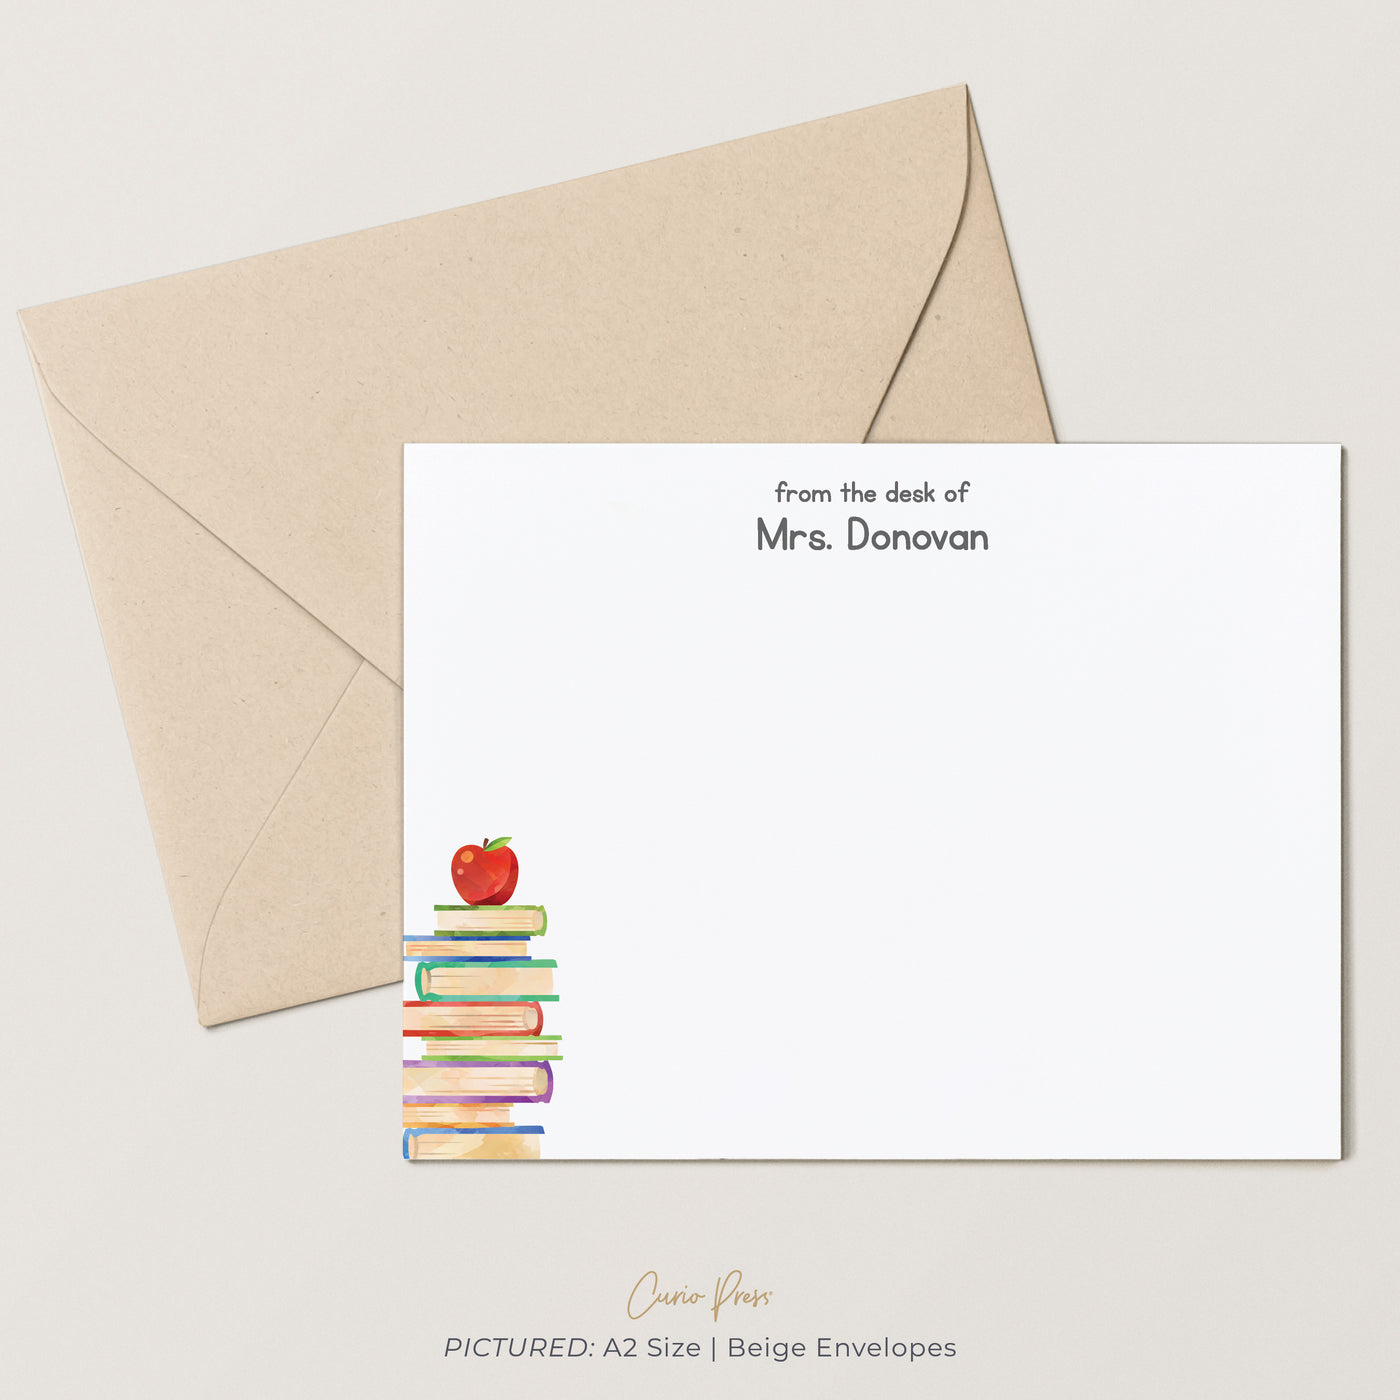 Curio Press Personalized Stationery Flat Note Cards and Envelopes